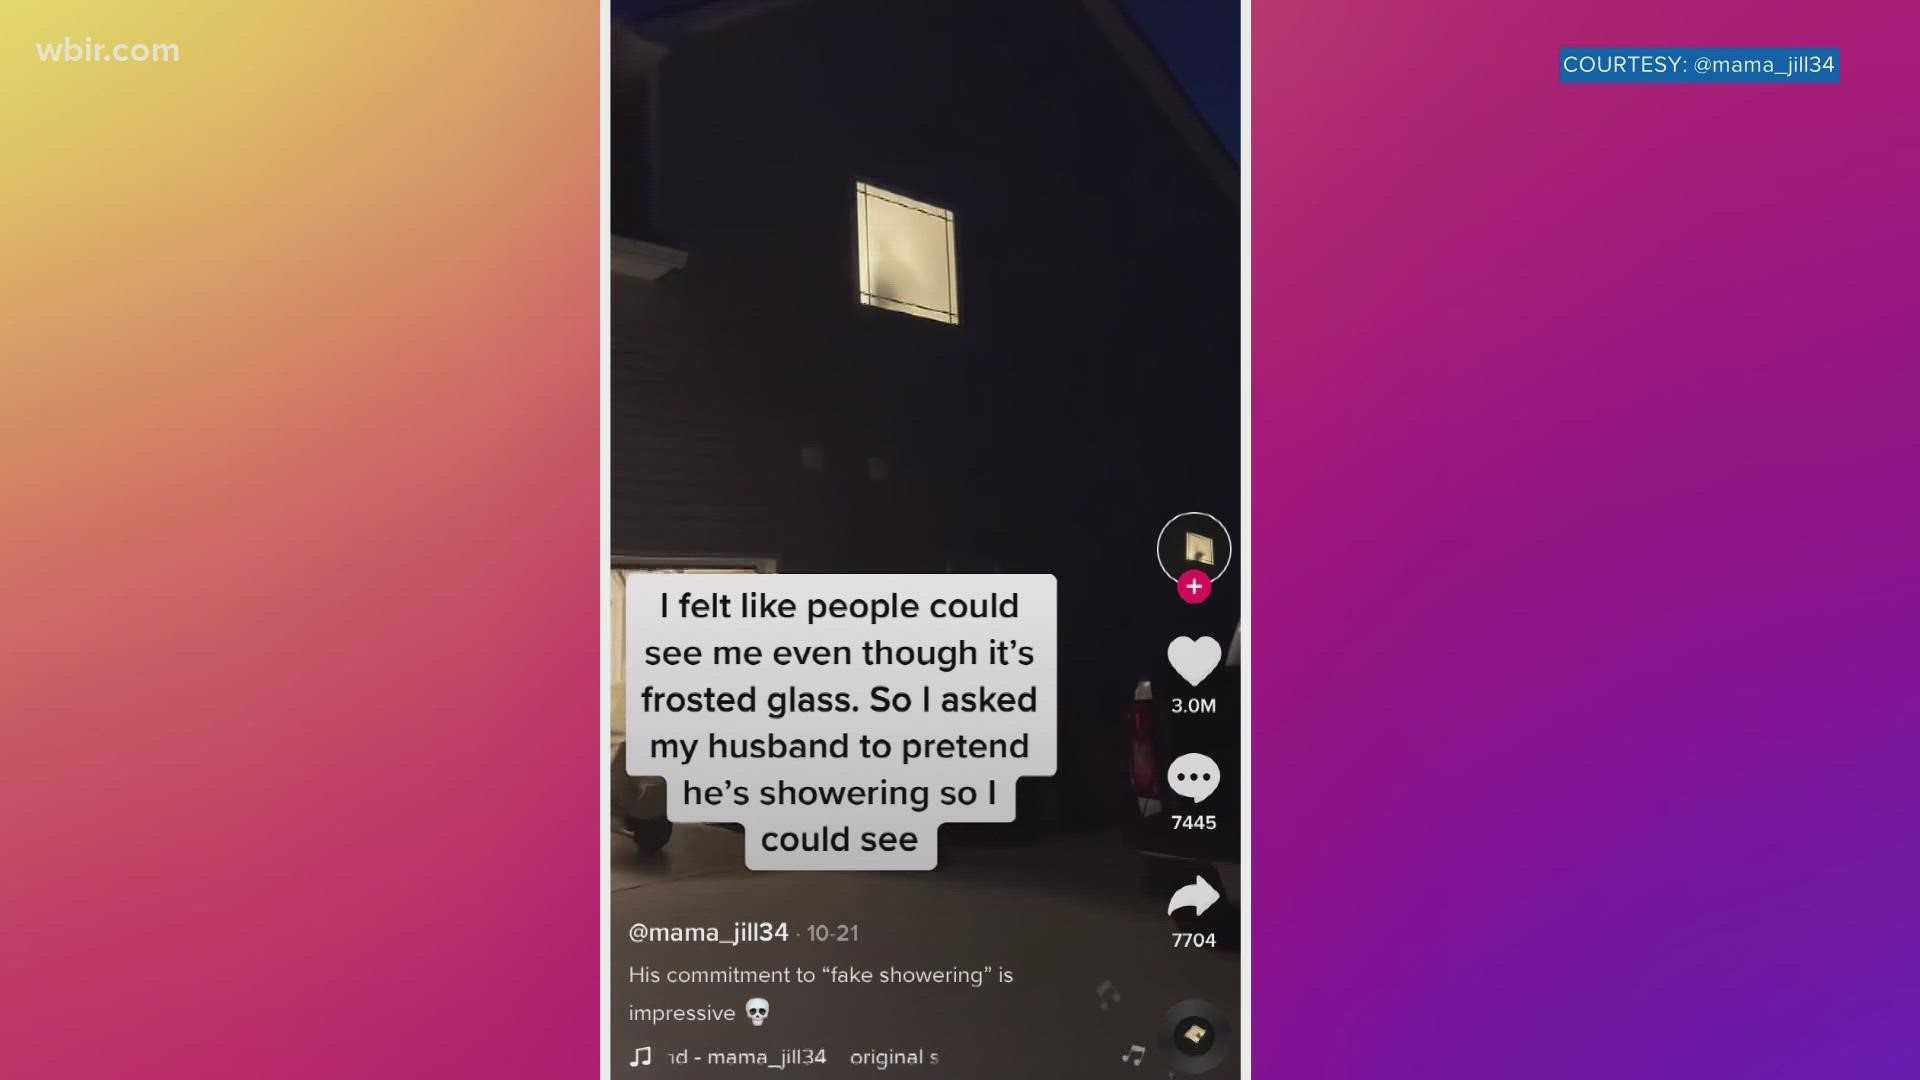 18 million views later, people around the world know about the couple's see-through frosted glass window and how they are making the window worthwhile.